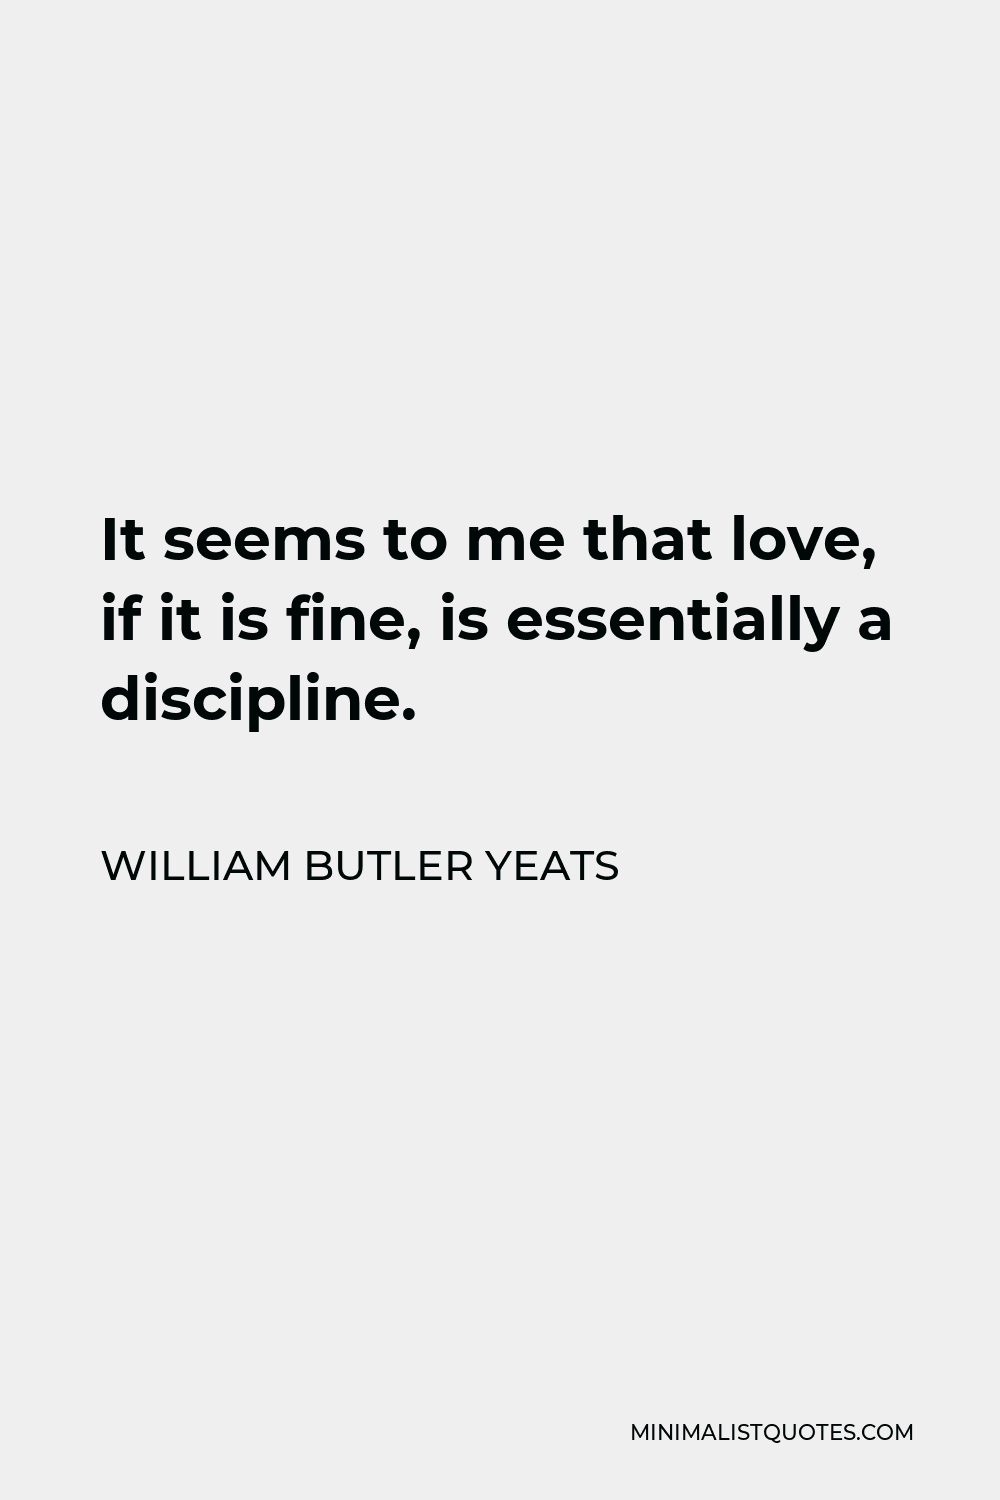 William Butler Yeats Quote - It seems to me that love, if it is fine, is essentially a discipline.